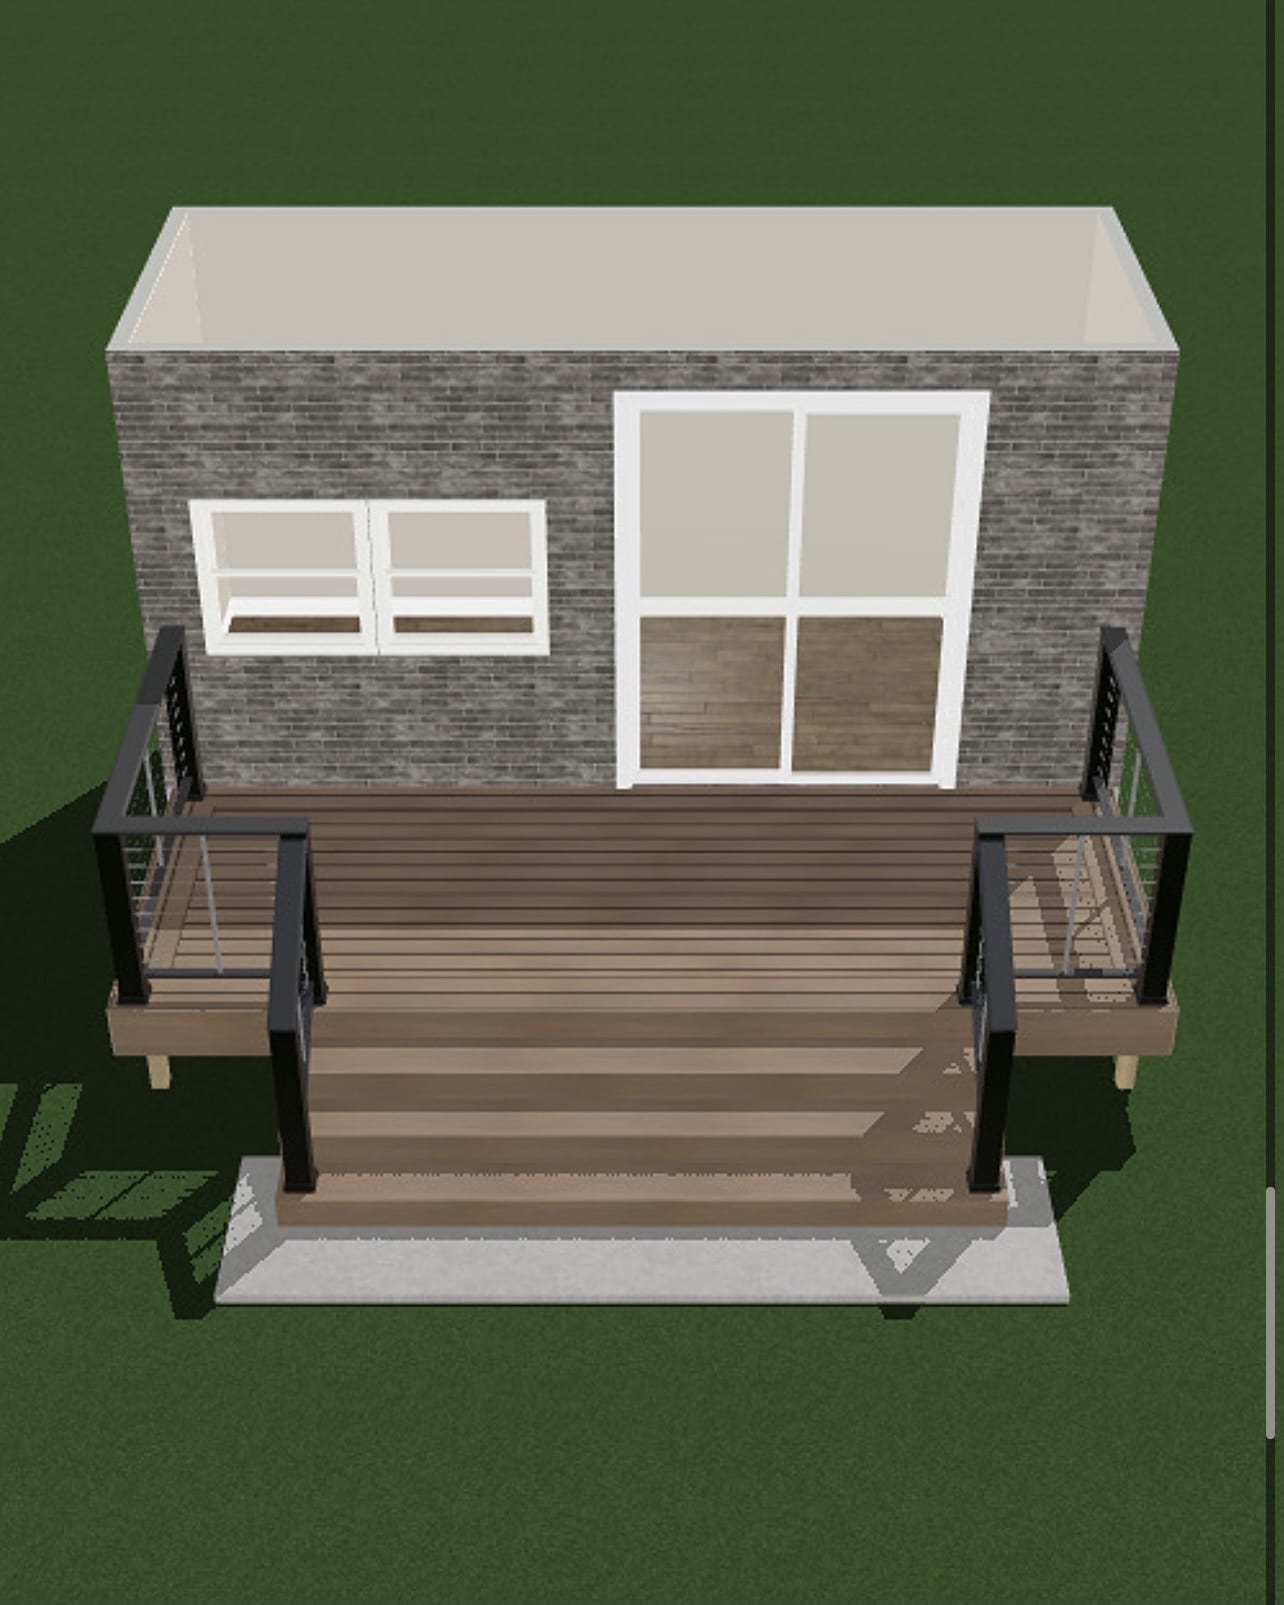 Our deck rendering